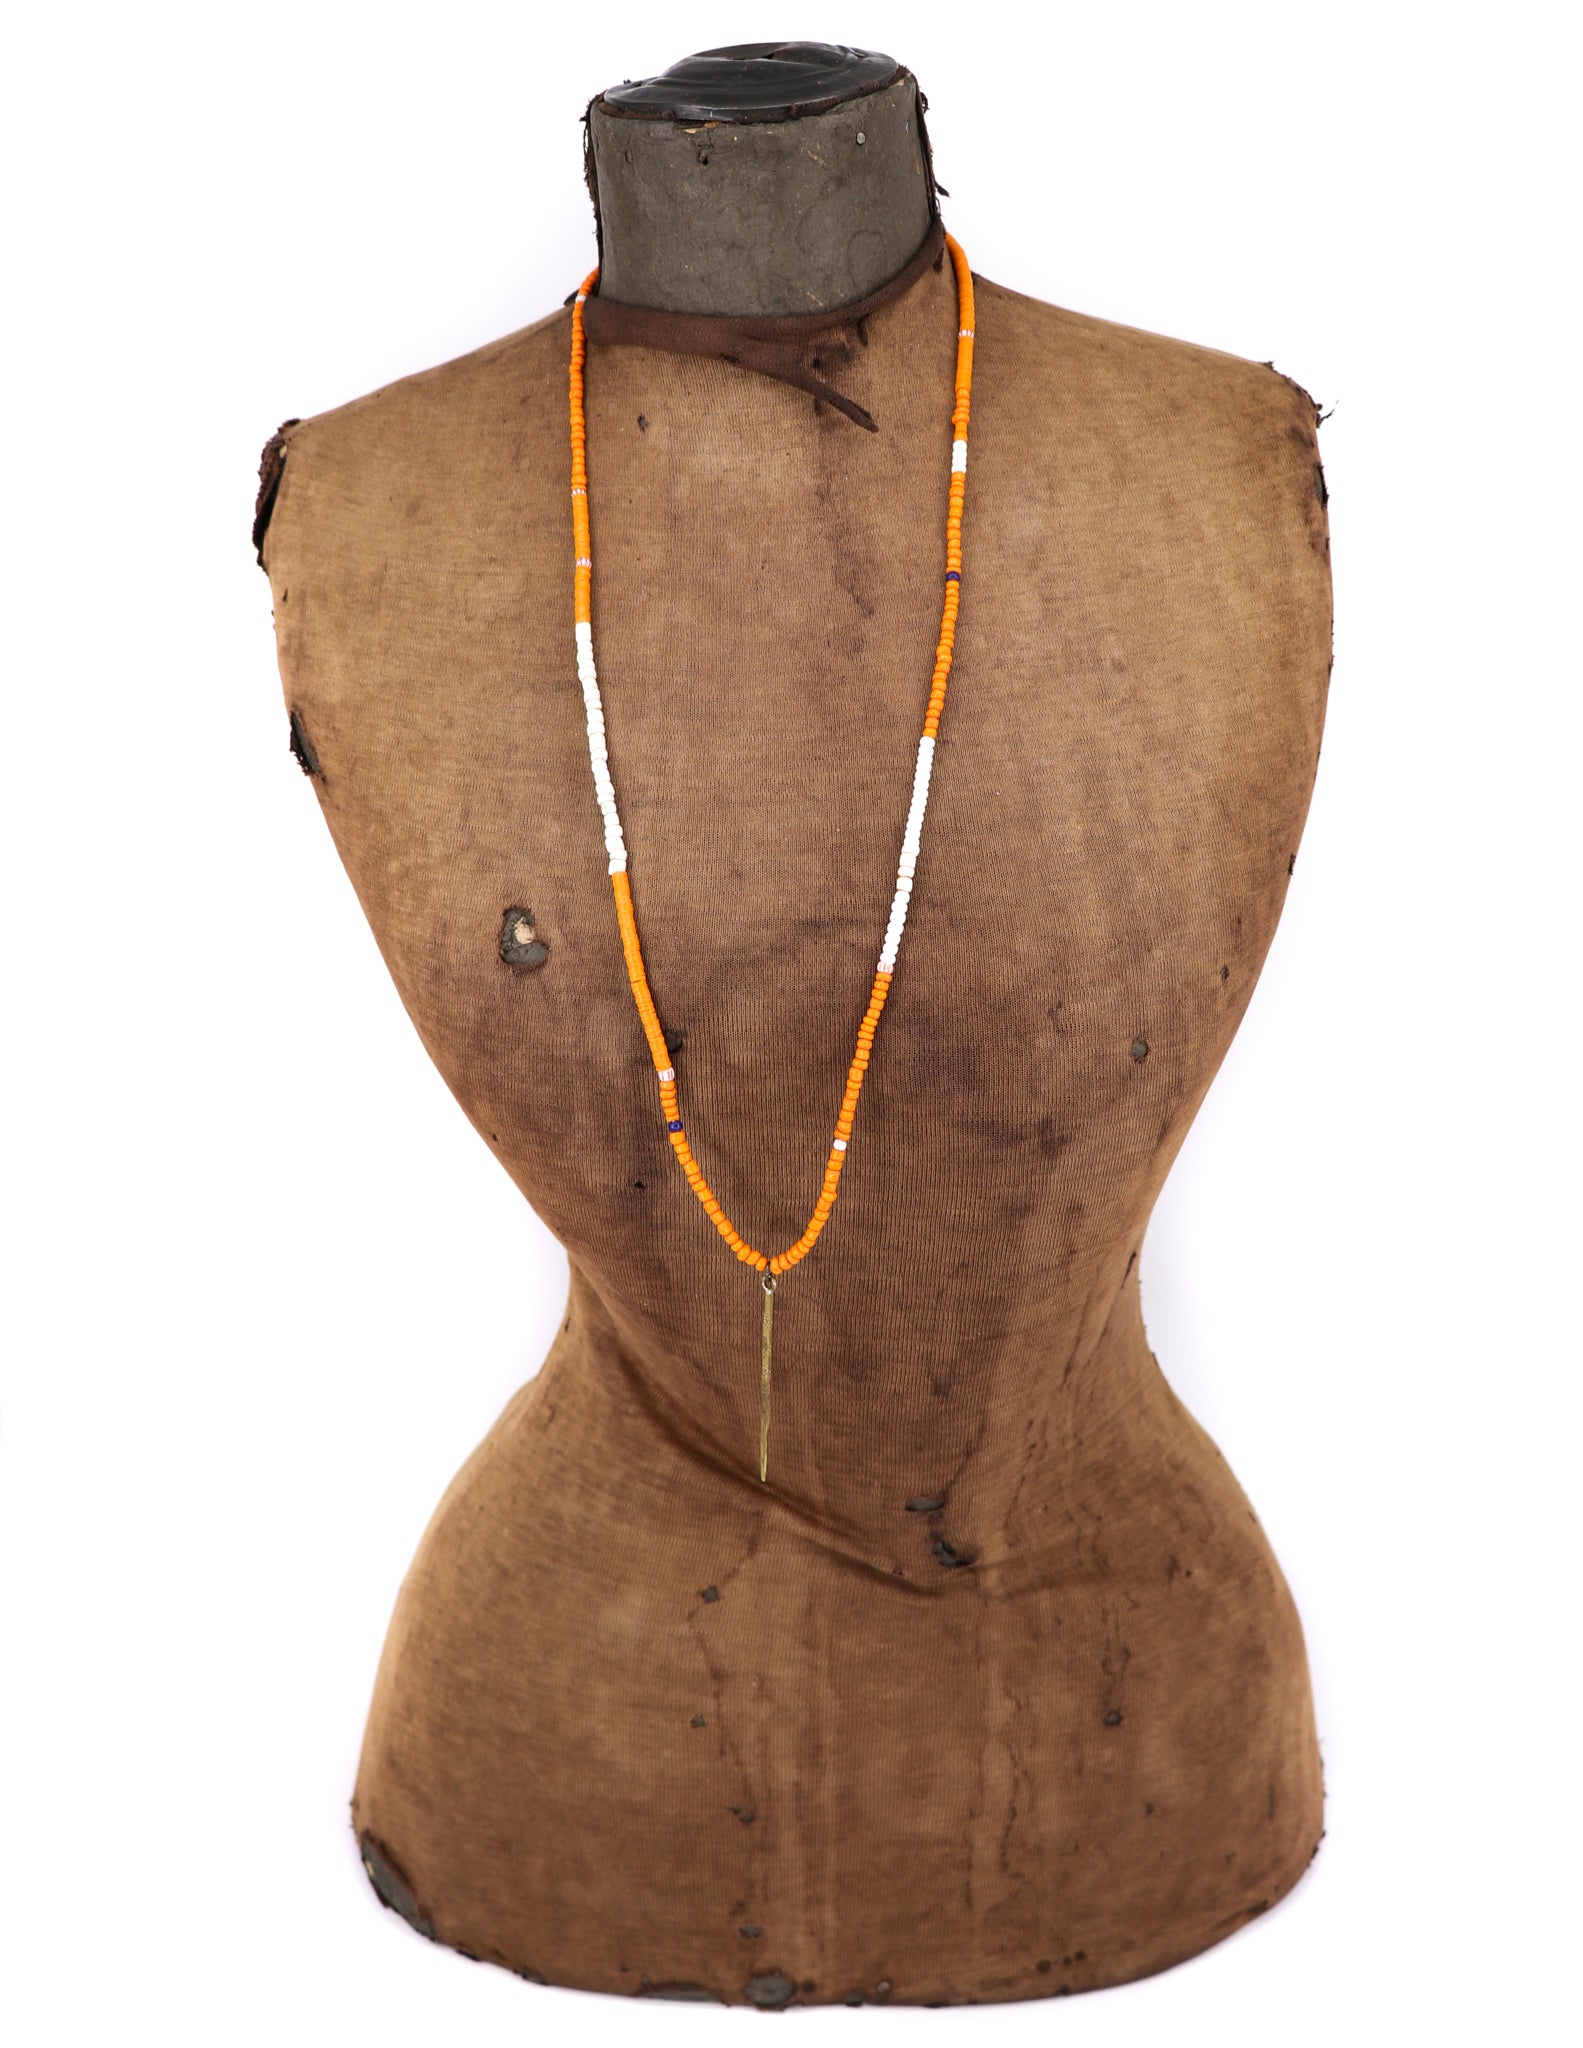 African vinyl and trade bead necklace with a brass pendant